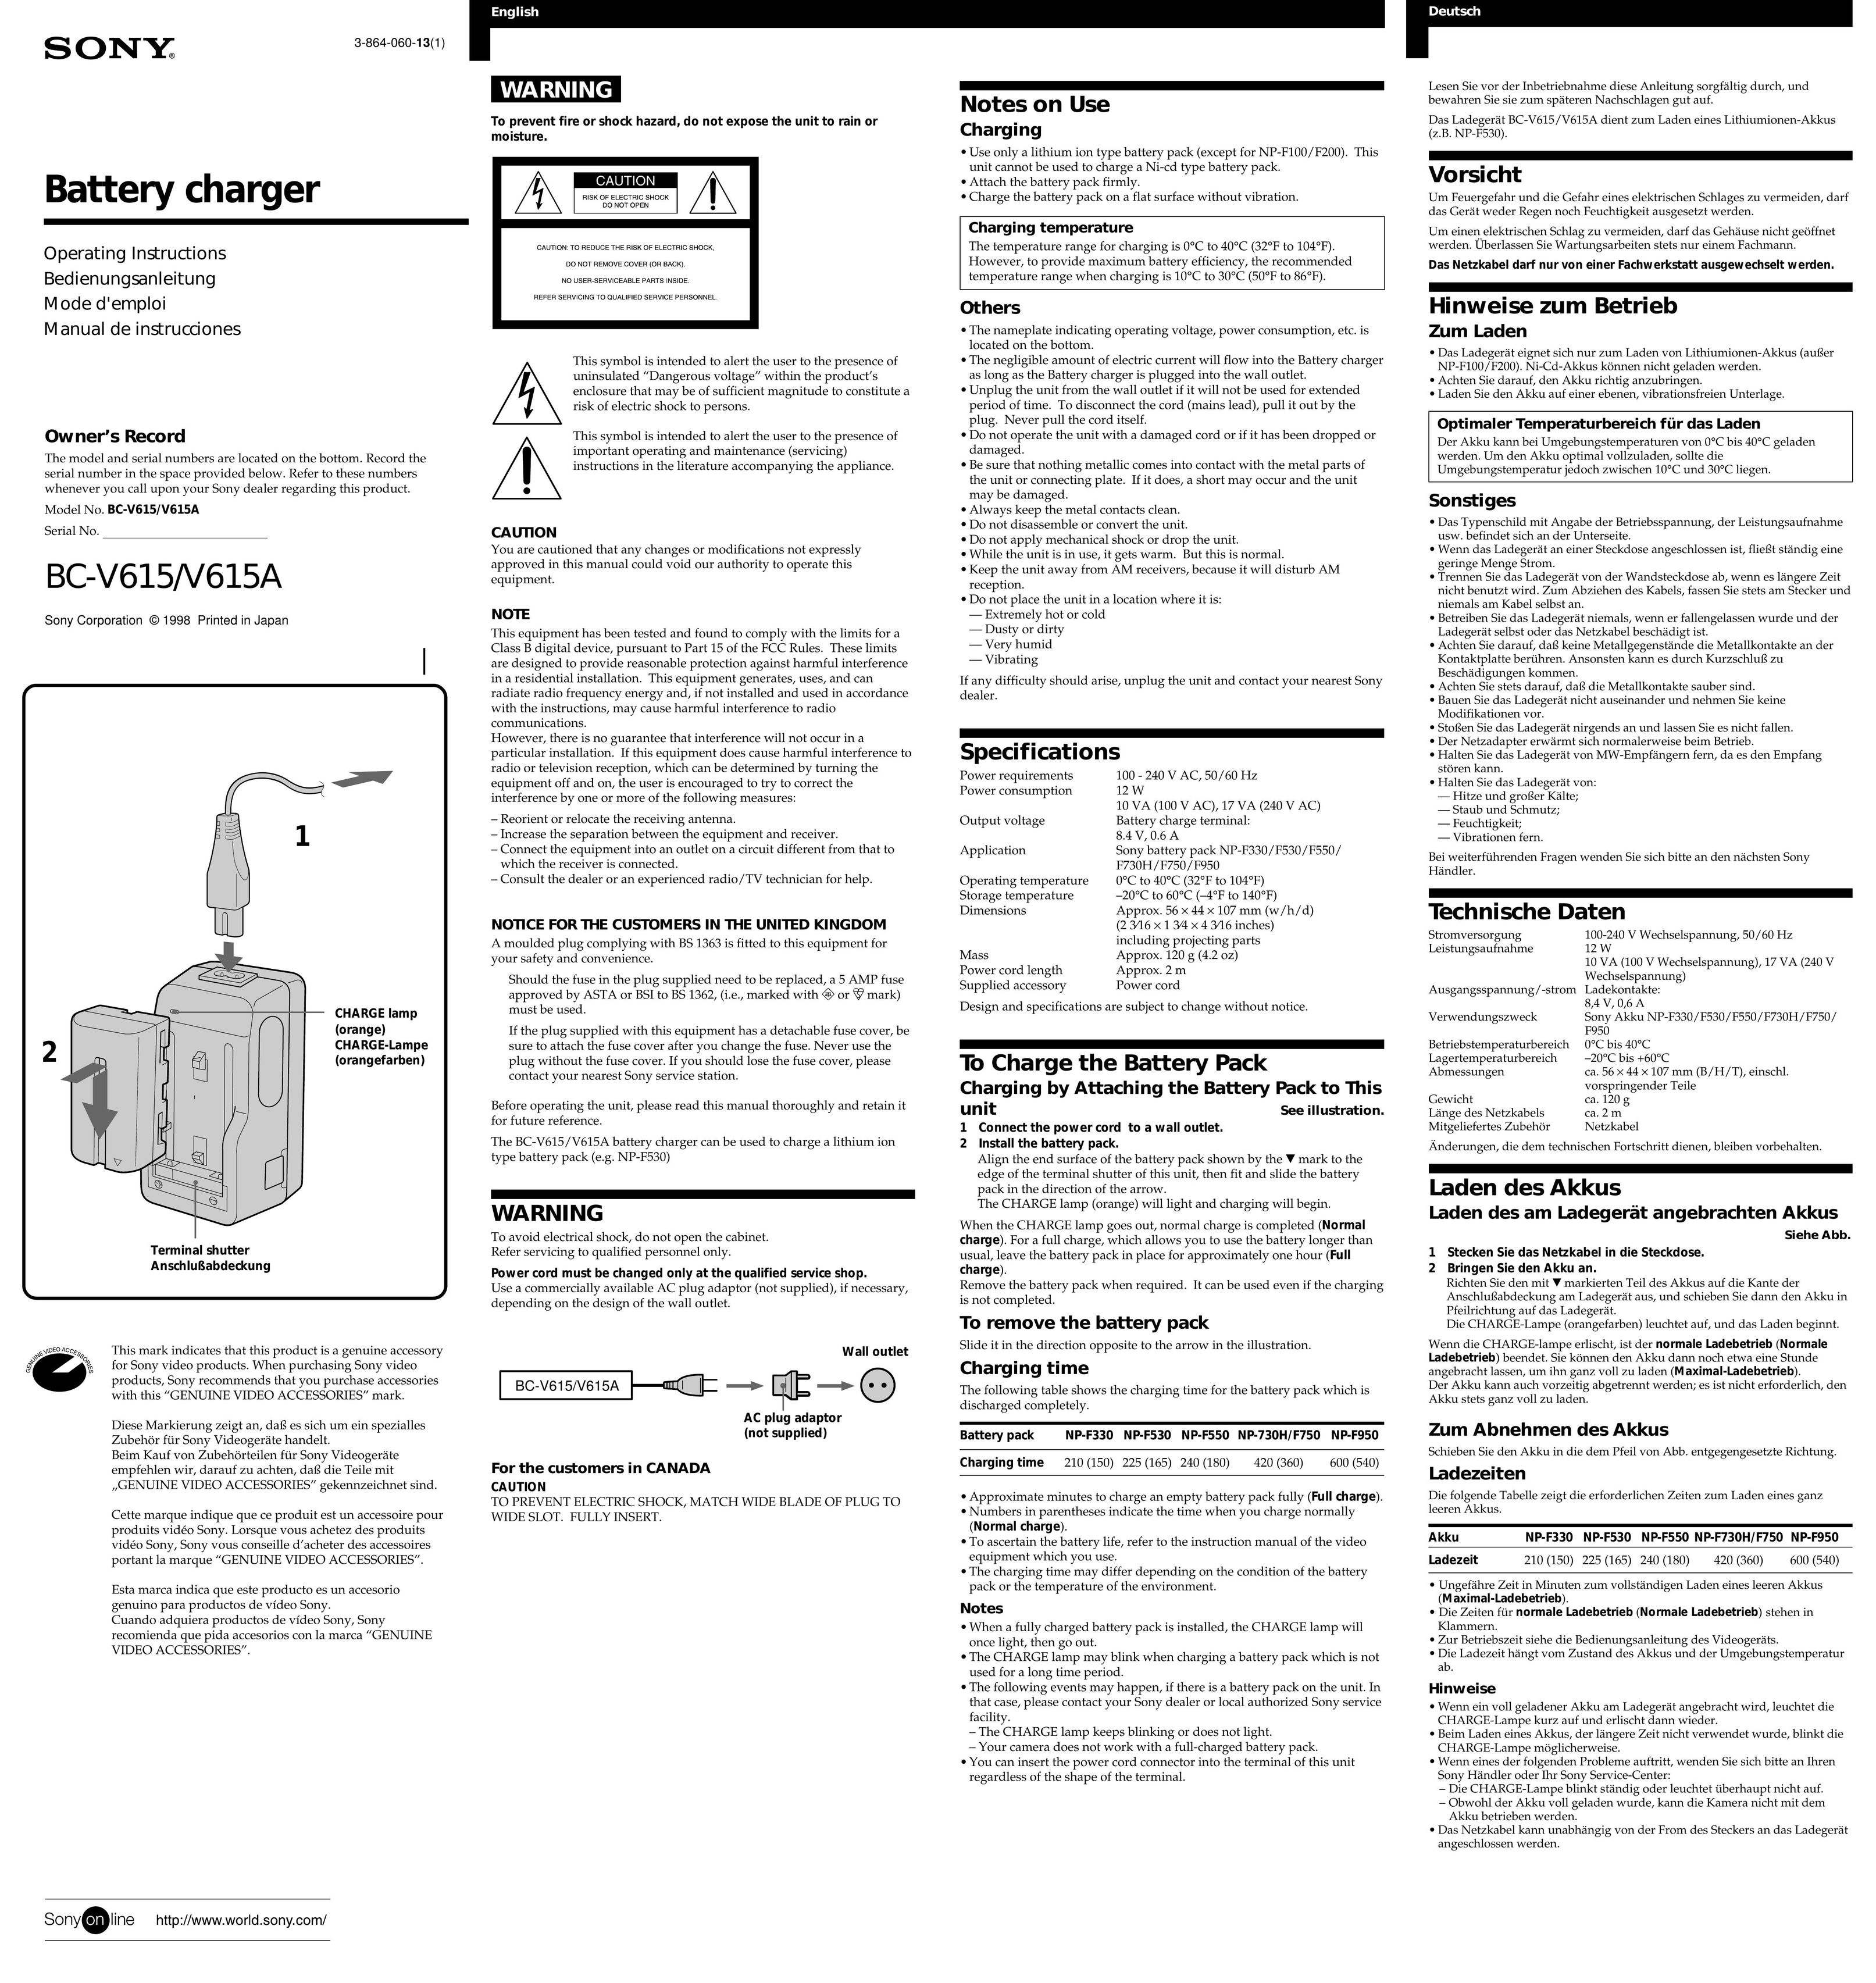 Sony BC-V615/V615A Battery Charger User Manual